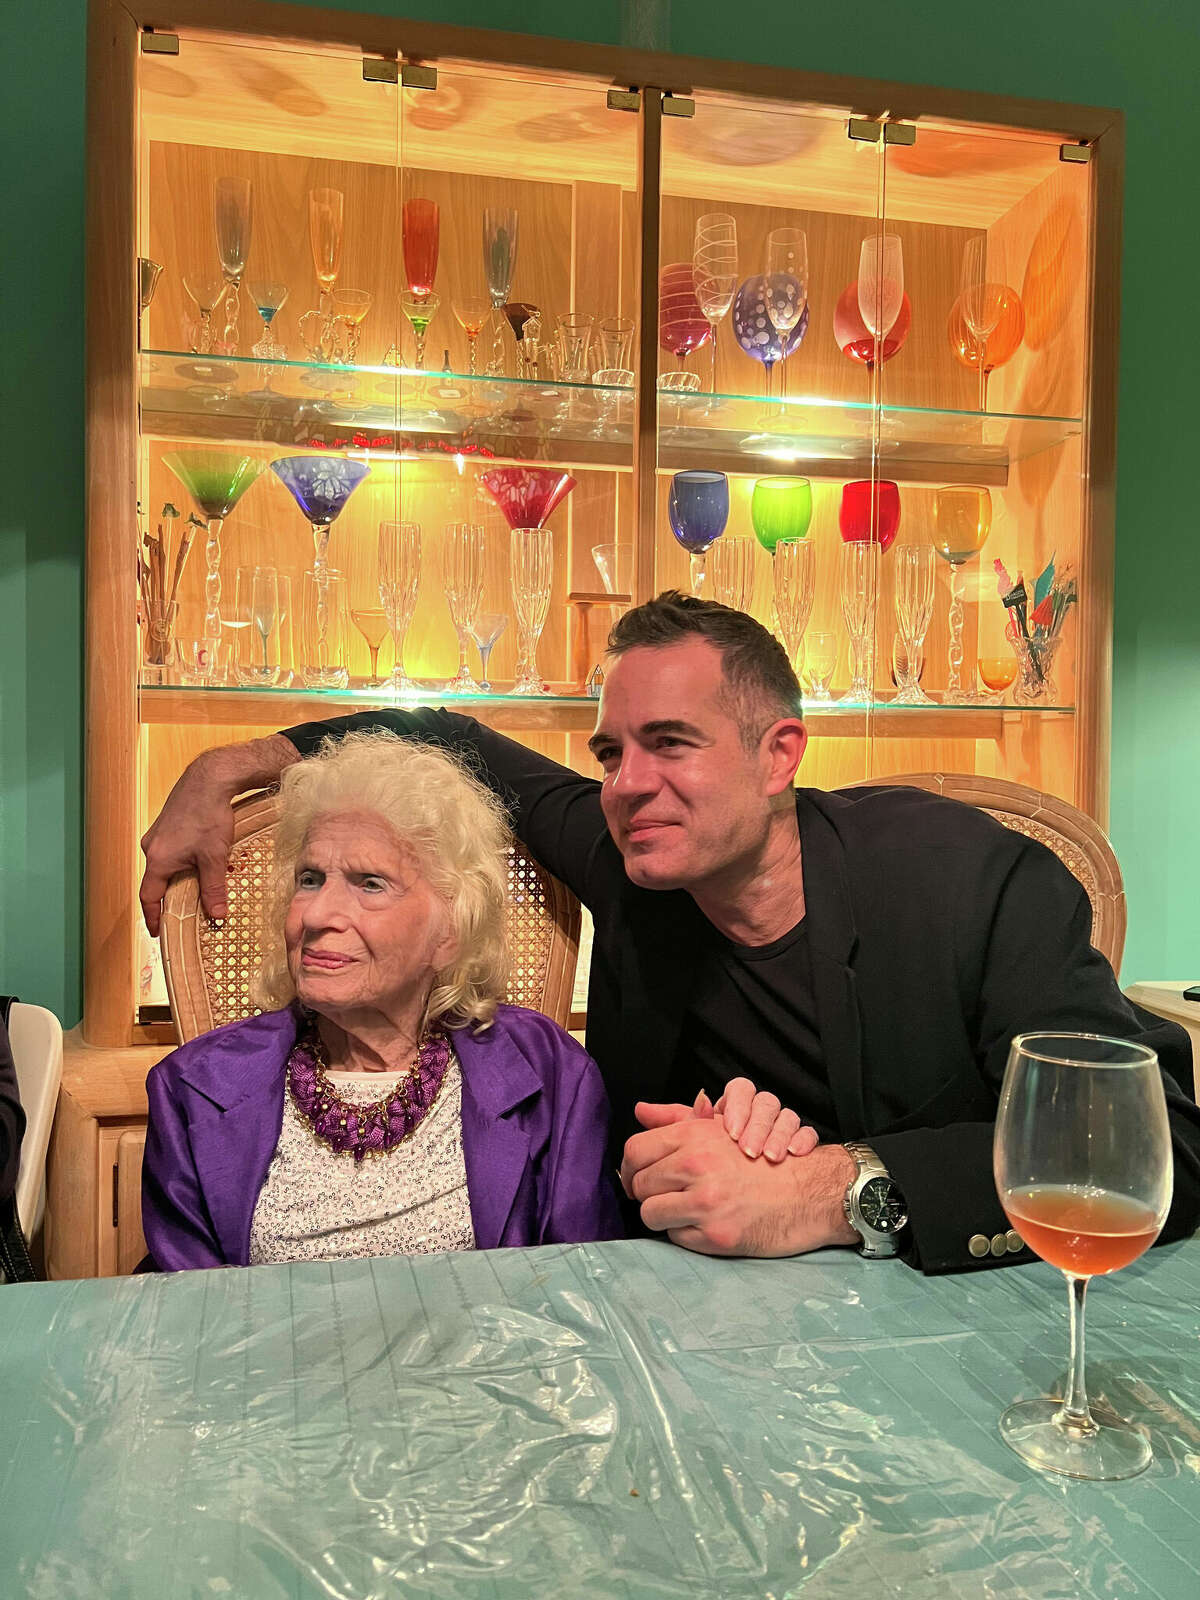 Troy restaurateur Vic Christopher with his grandmother Mary Cantazarita. He adapted her meatball recipe for use in his Donna's Italian Restaurant.